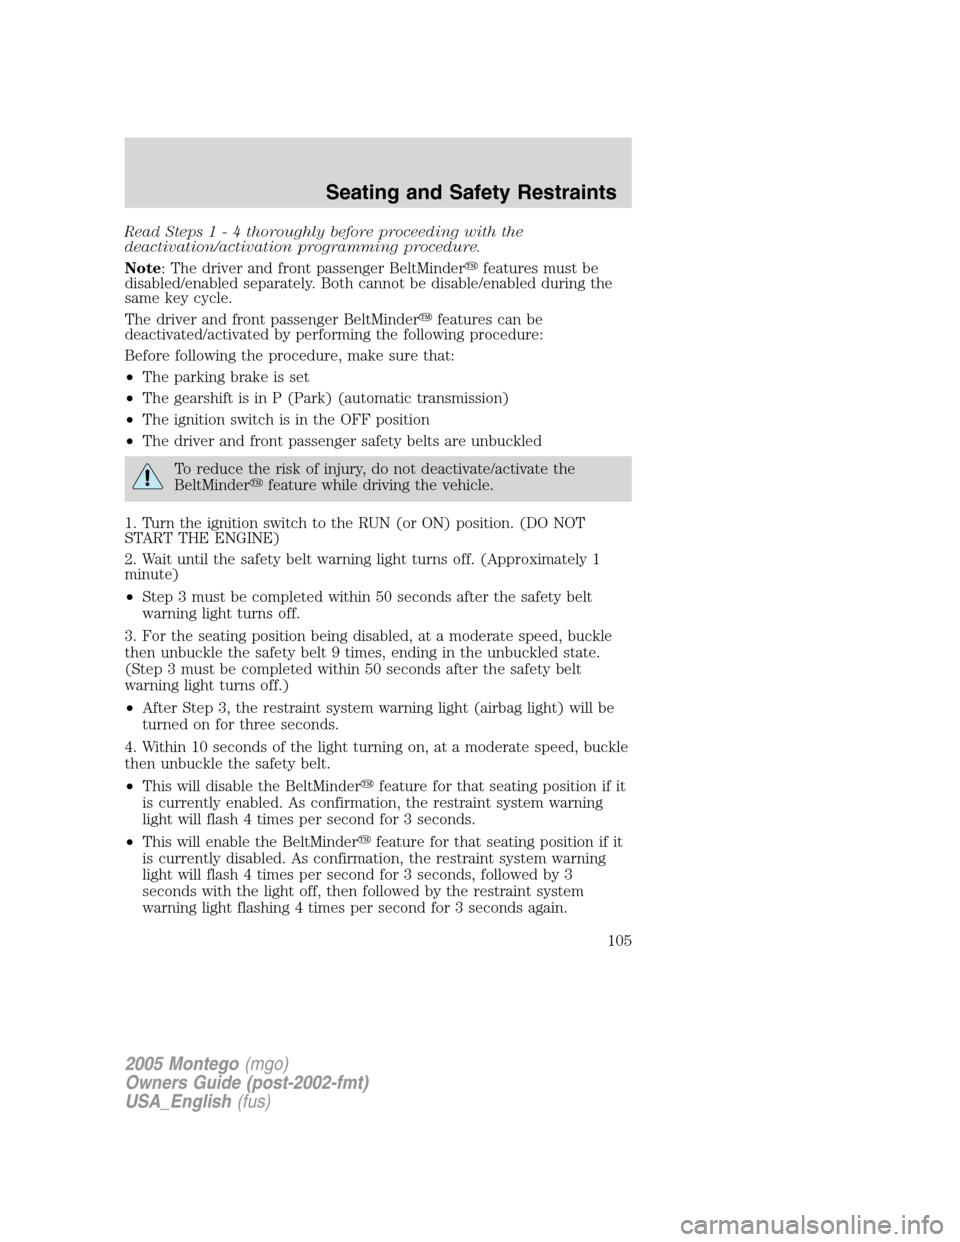 Mercury Montego 2005  Owners Manuals Read Steps1-4thoroughly before proceeding with the
deactivation/activation programming procedure.
Note: The driver and front passenger BeltMinderfeatures must be
disabled/enabled separately. Both can